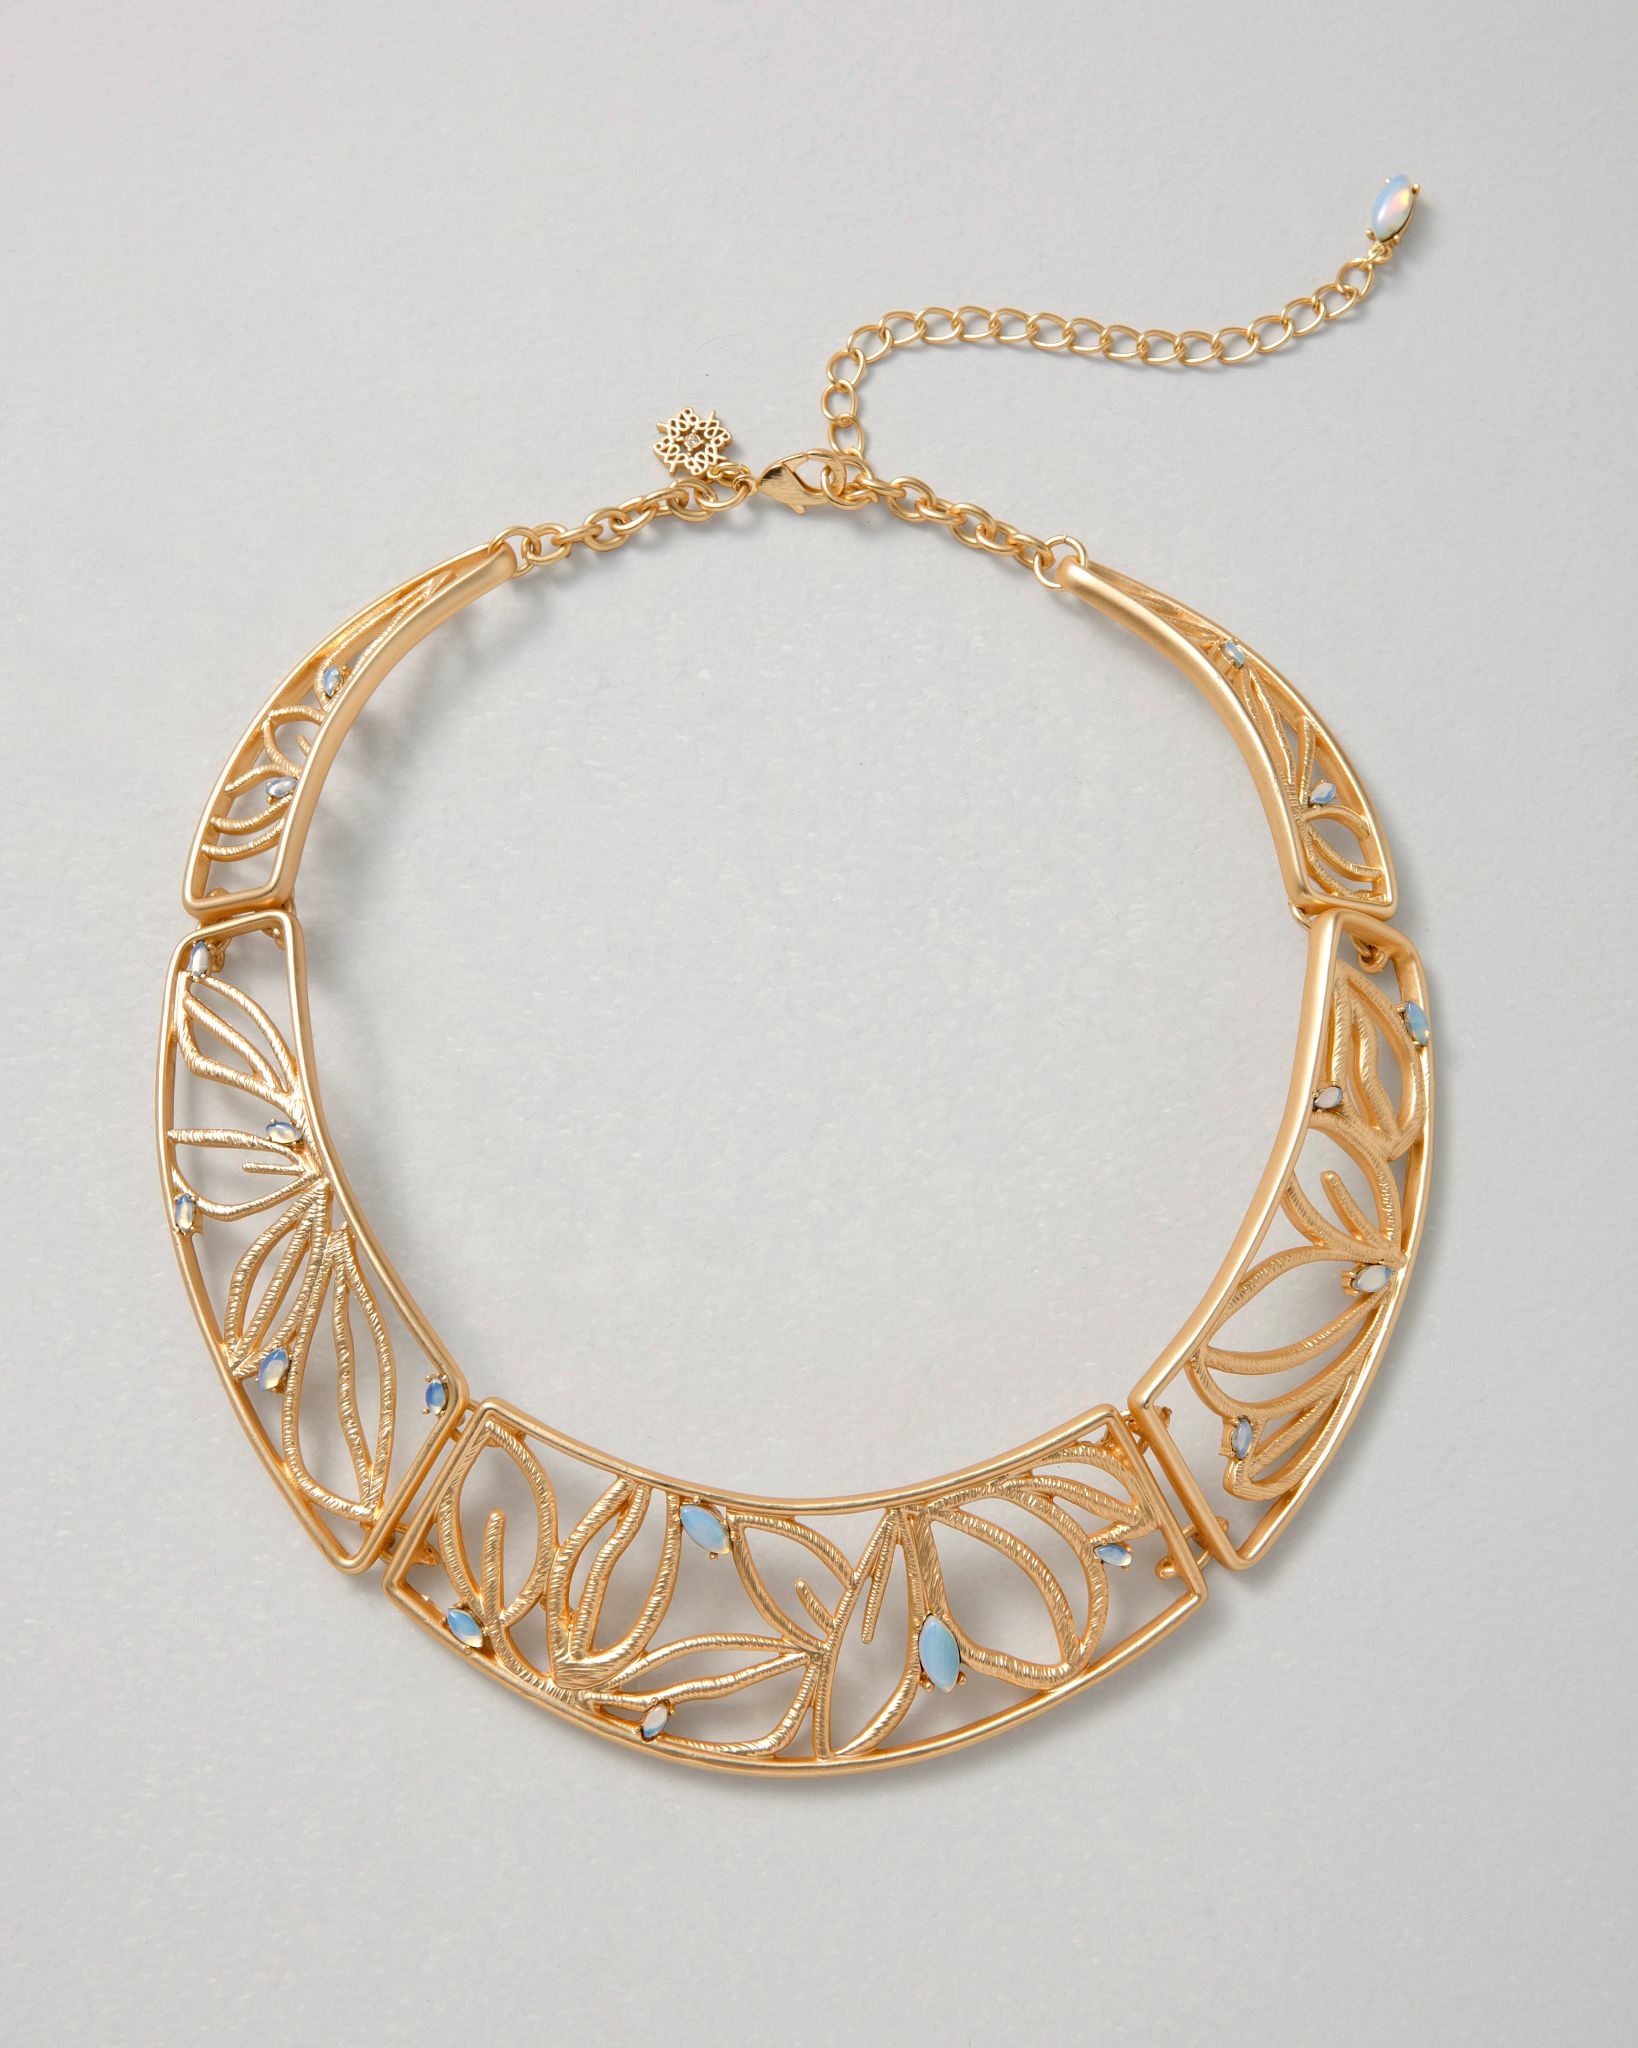 Goldtone Filigree Faux Moonstone Collar Necklace click to view larger image.